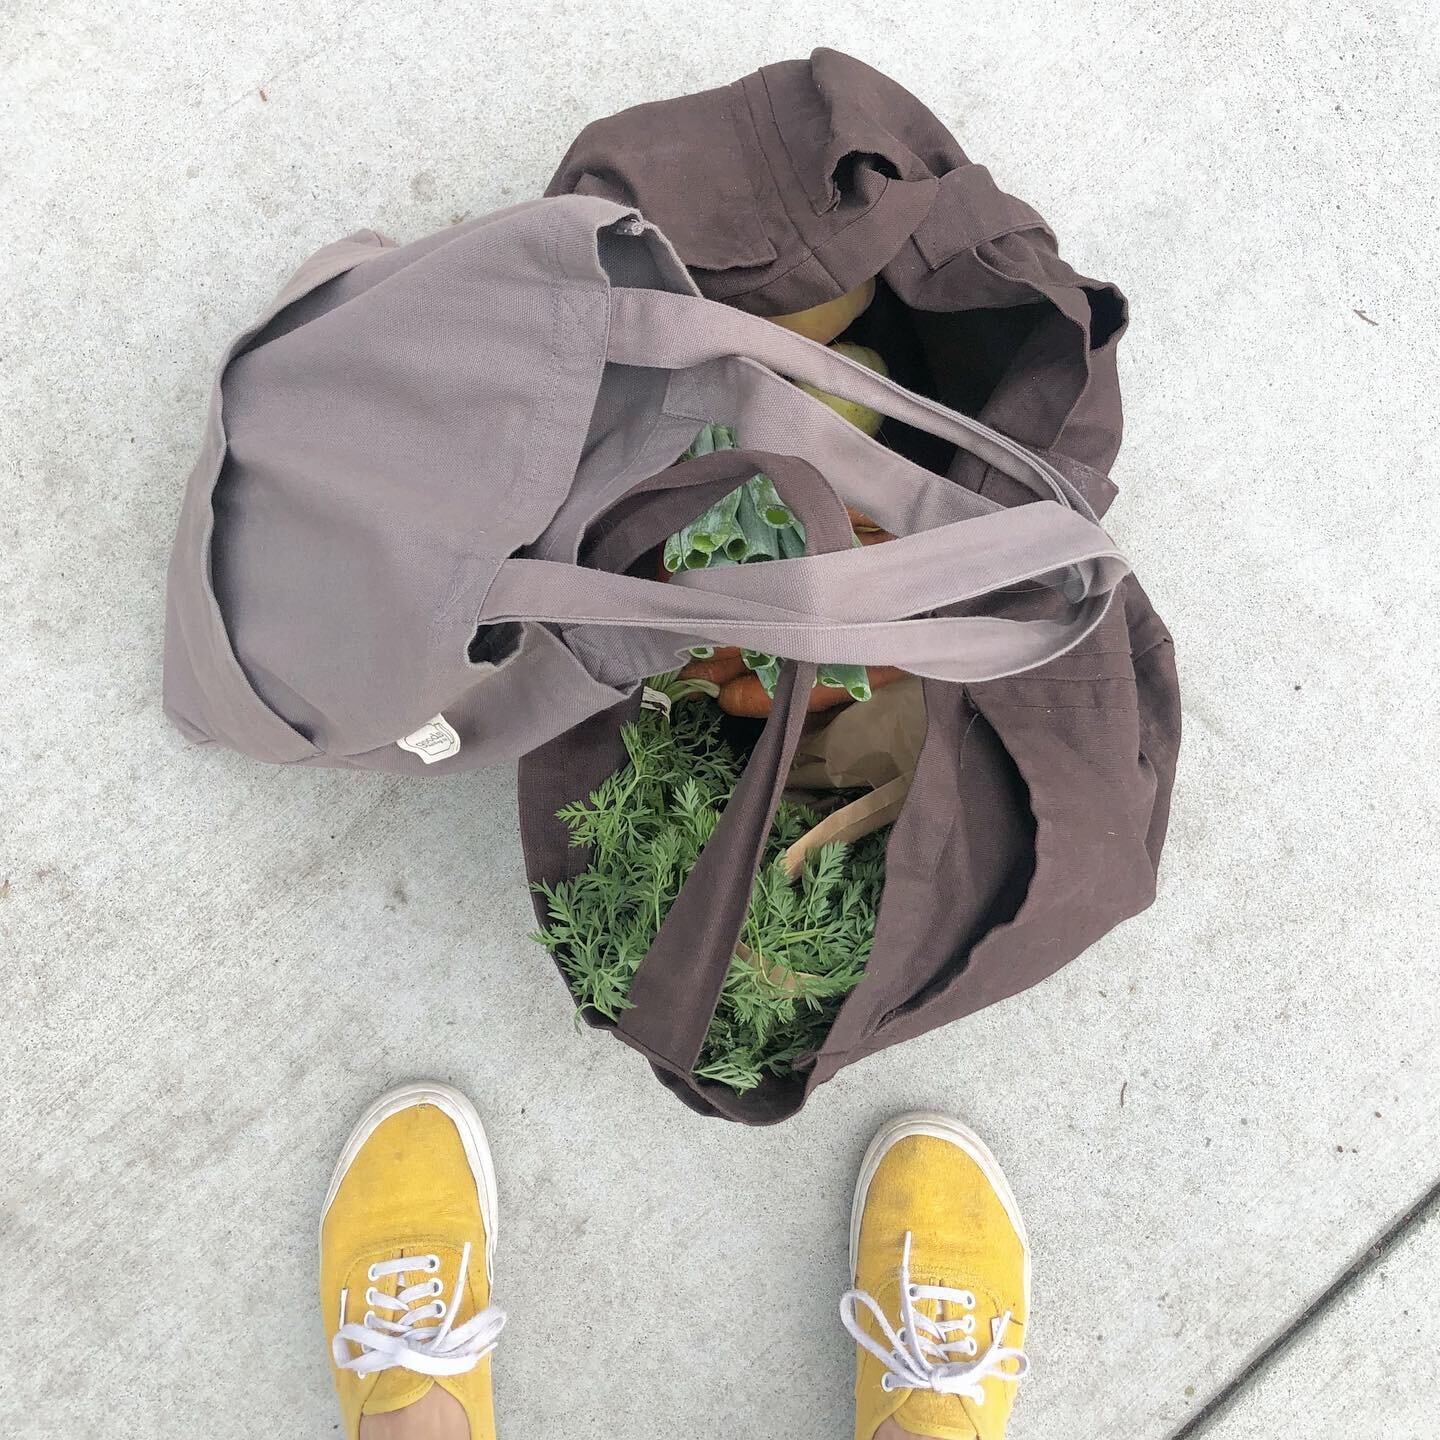 Just back from the @sunsetmercantile farmers market! Check out our website for  different bags &mdash; perfect for carrying our jars, farmers market goods, and everything else ...

#bringyourown #sogoods #lotsofpockets #reuse #reuseables #clothbags